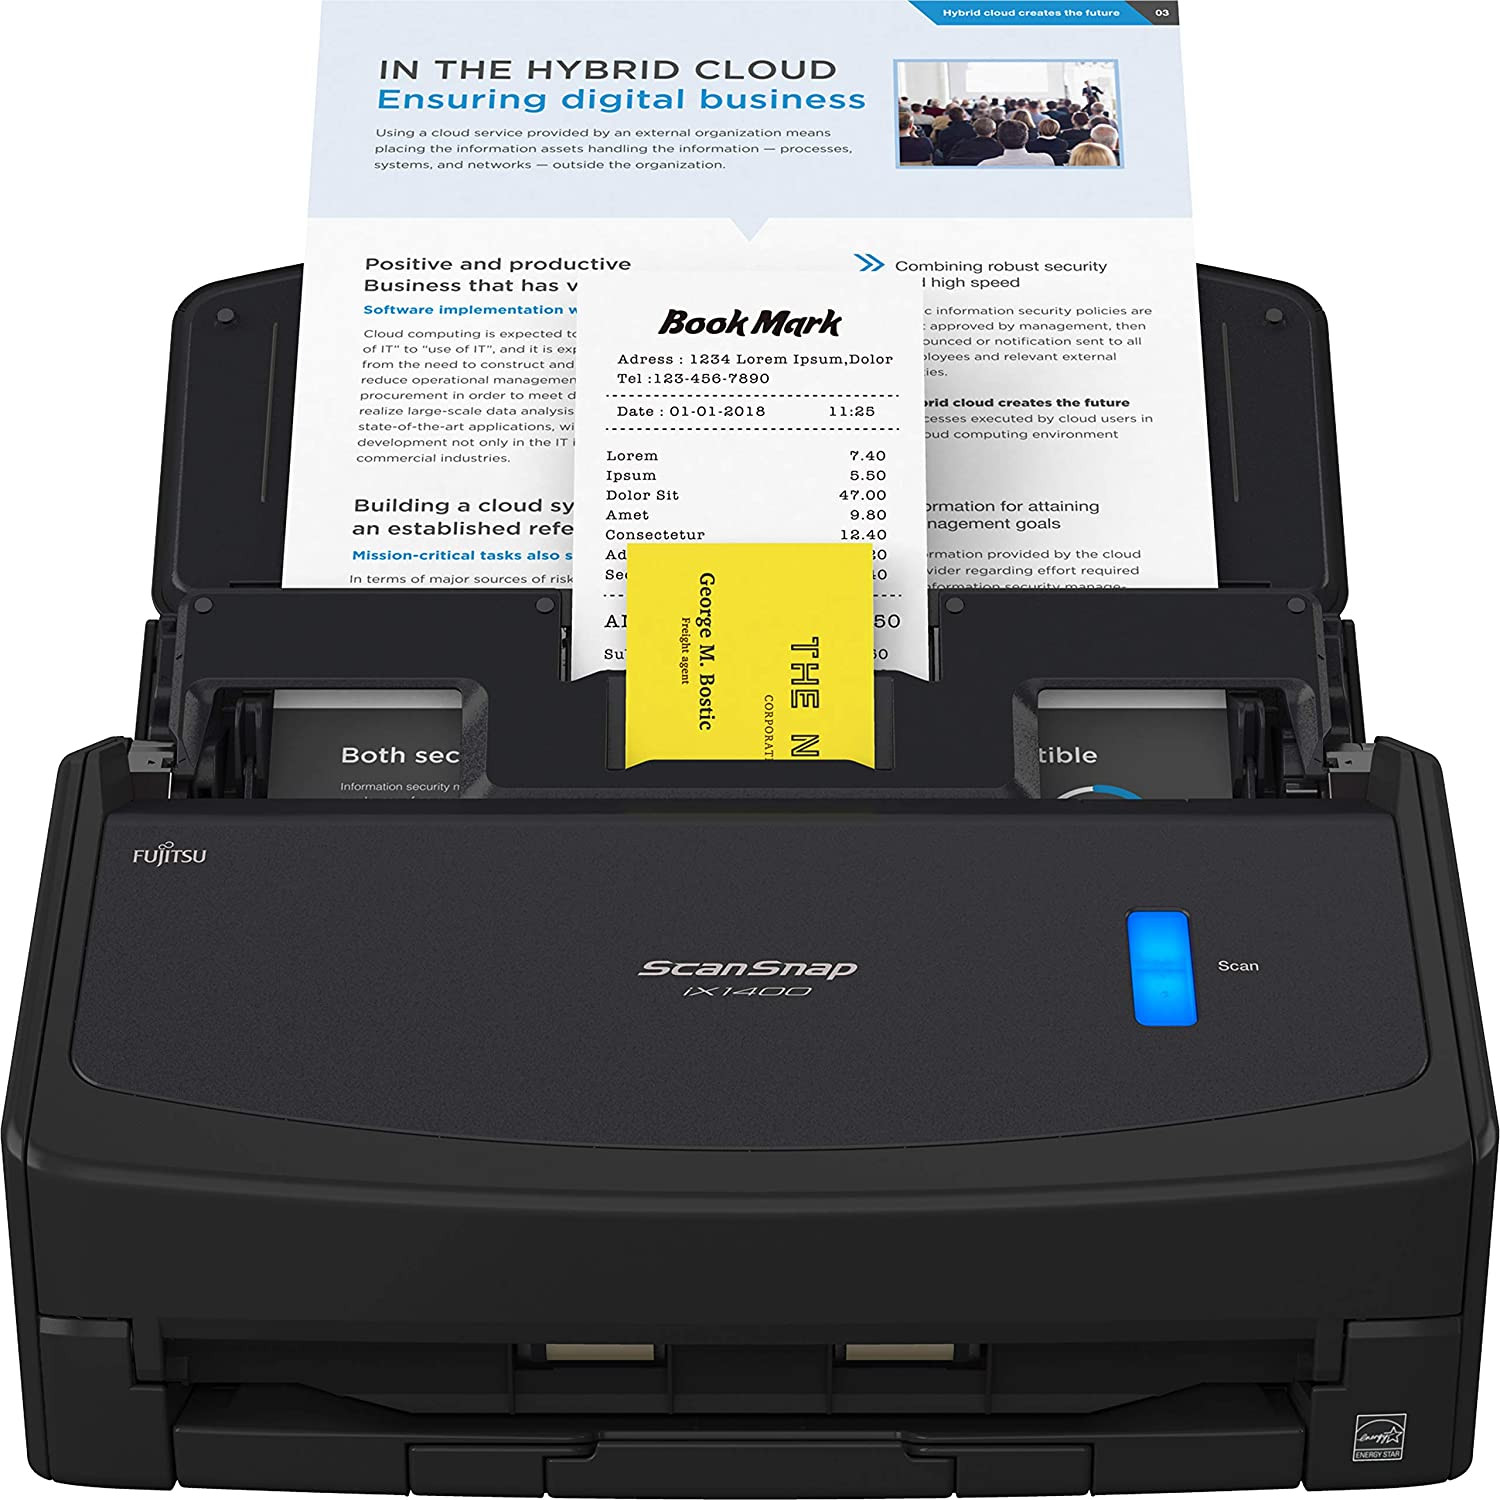 High Volume Scanning: How To Choose The Right High Capacity Scanner - Ricoh  Scanners